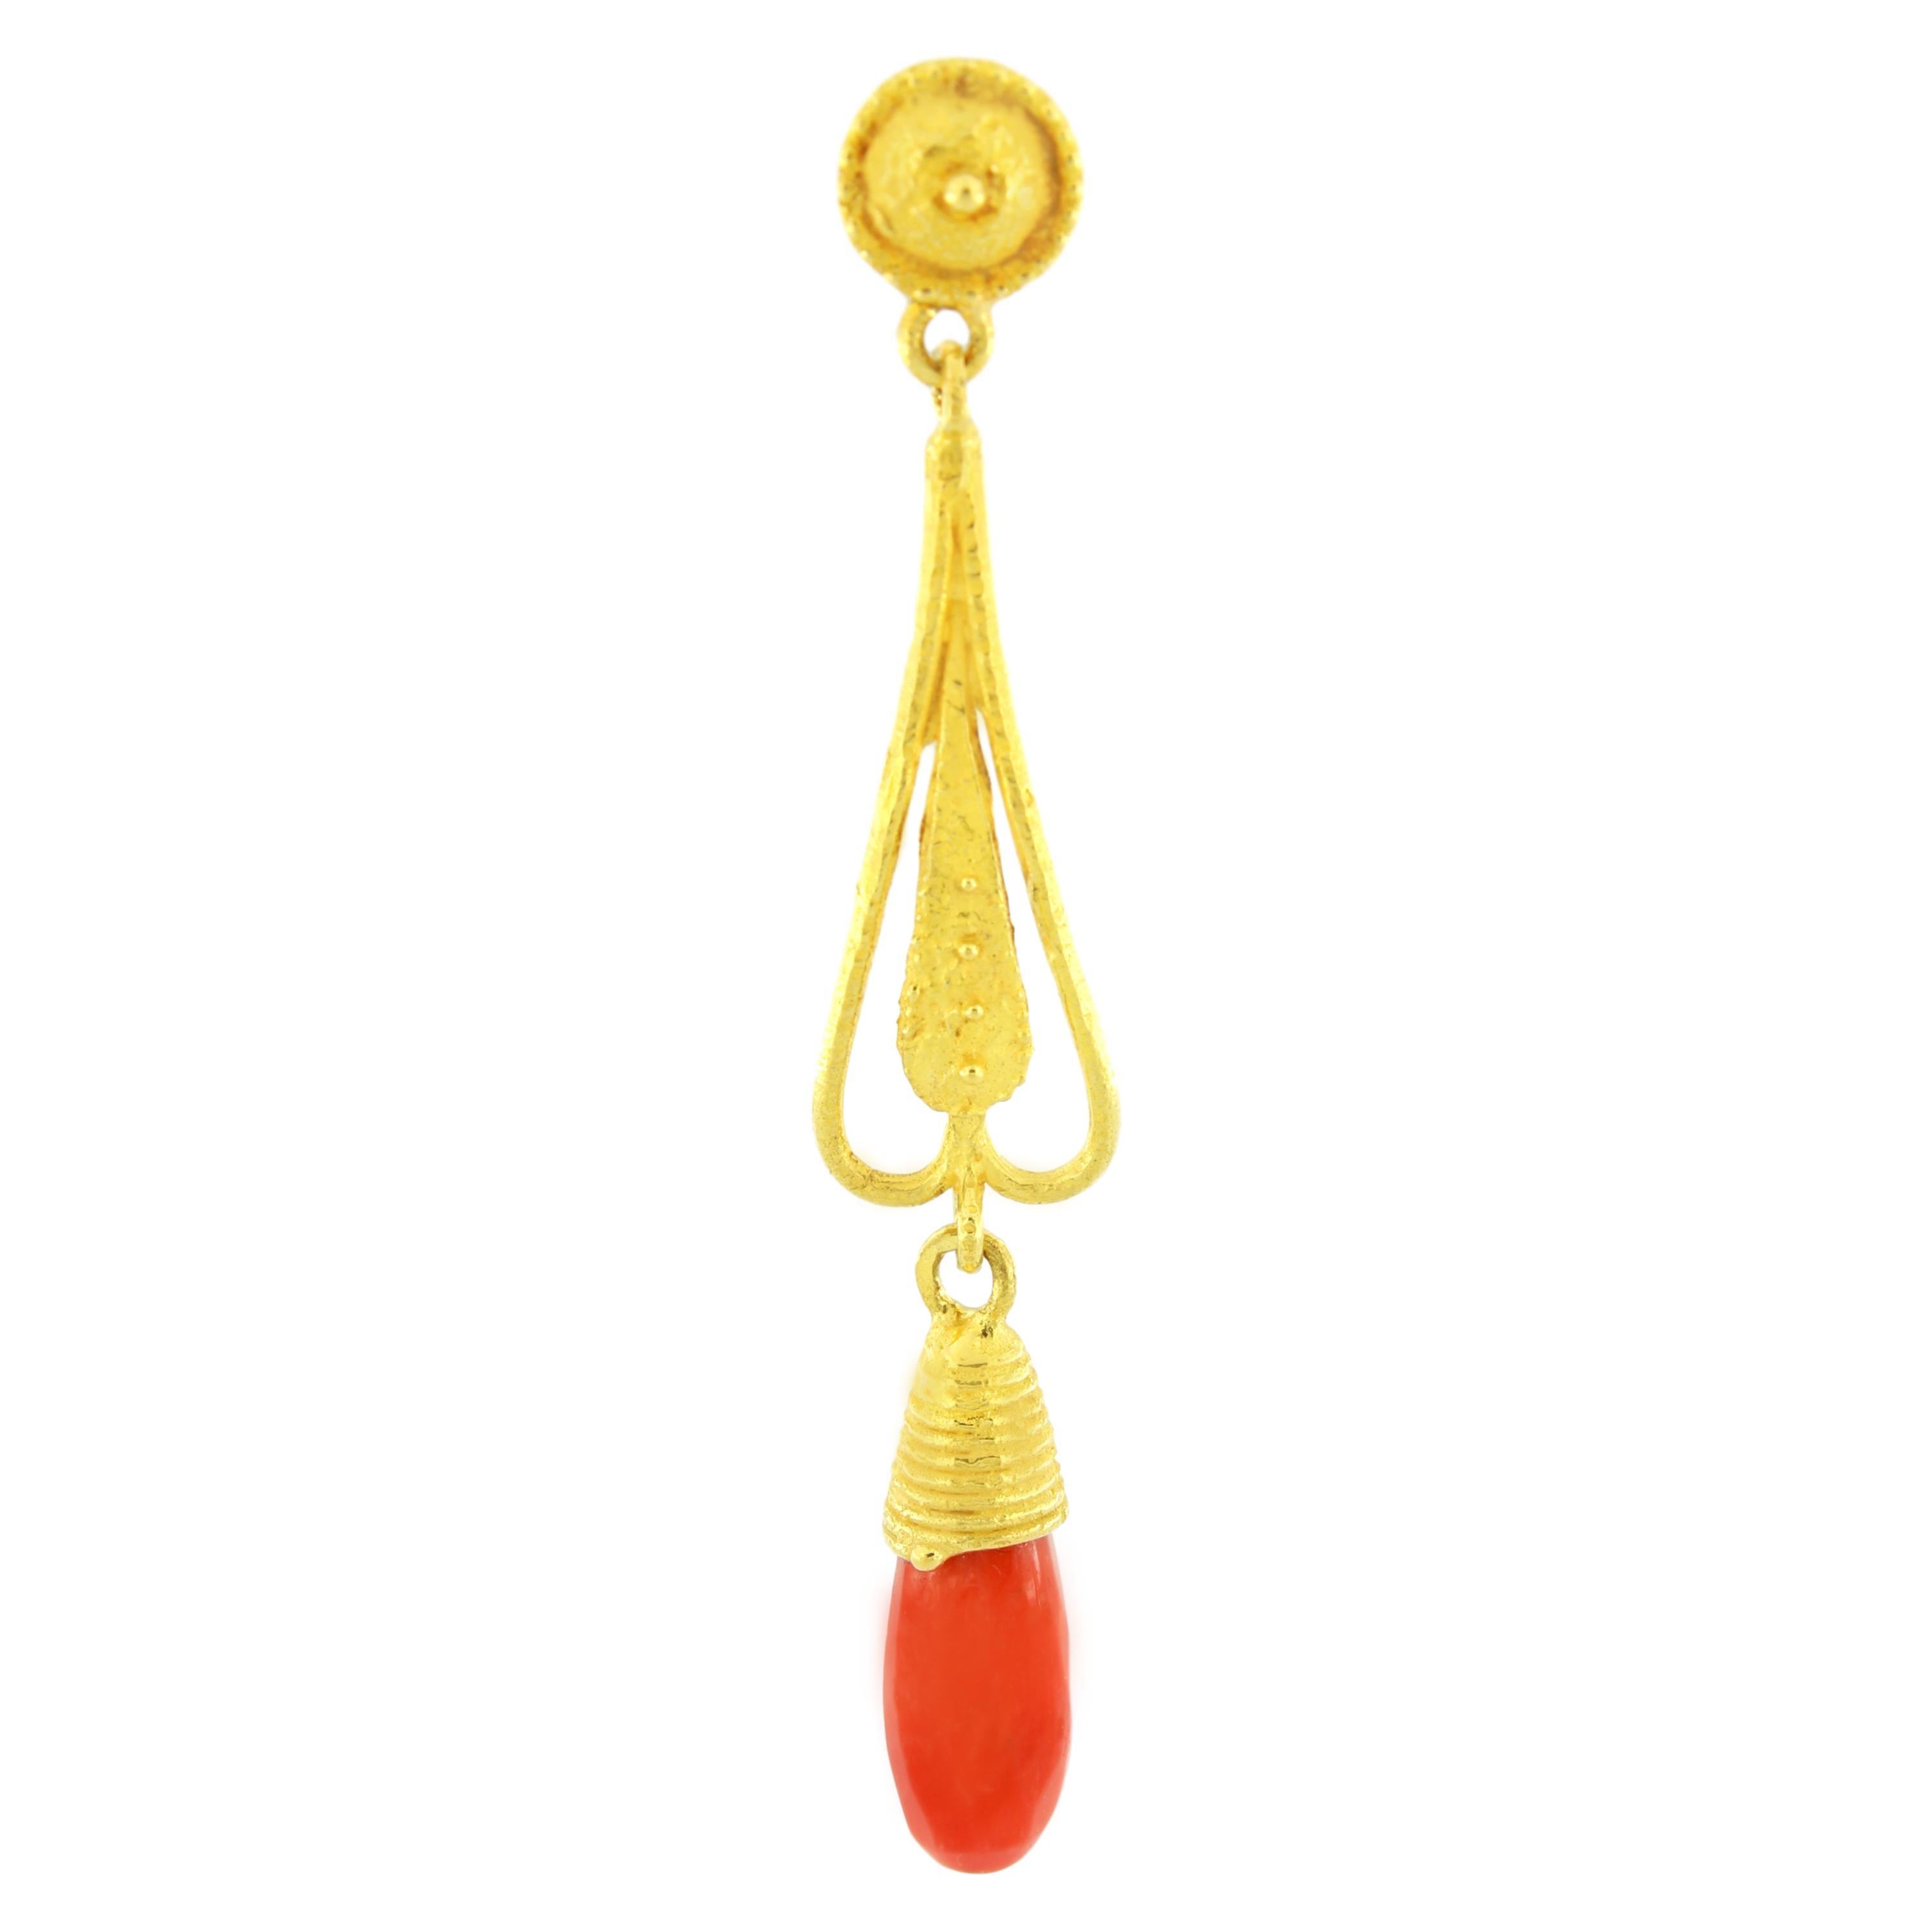 Gorgeous Satin Yellow Gold Dangle Earrings, from Sacchi’s 